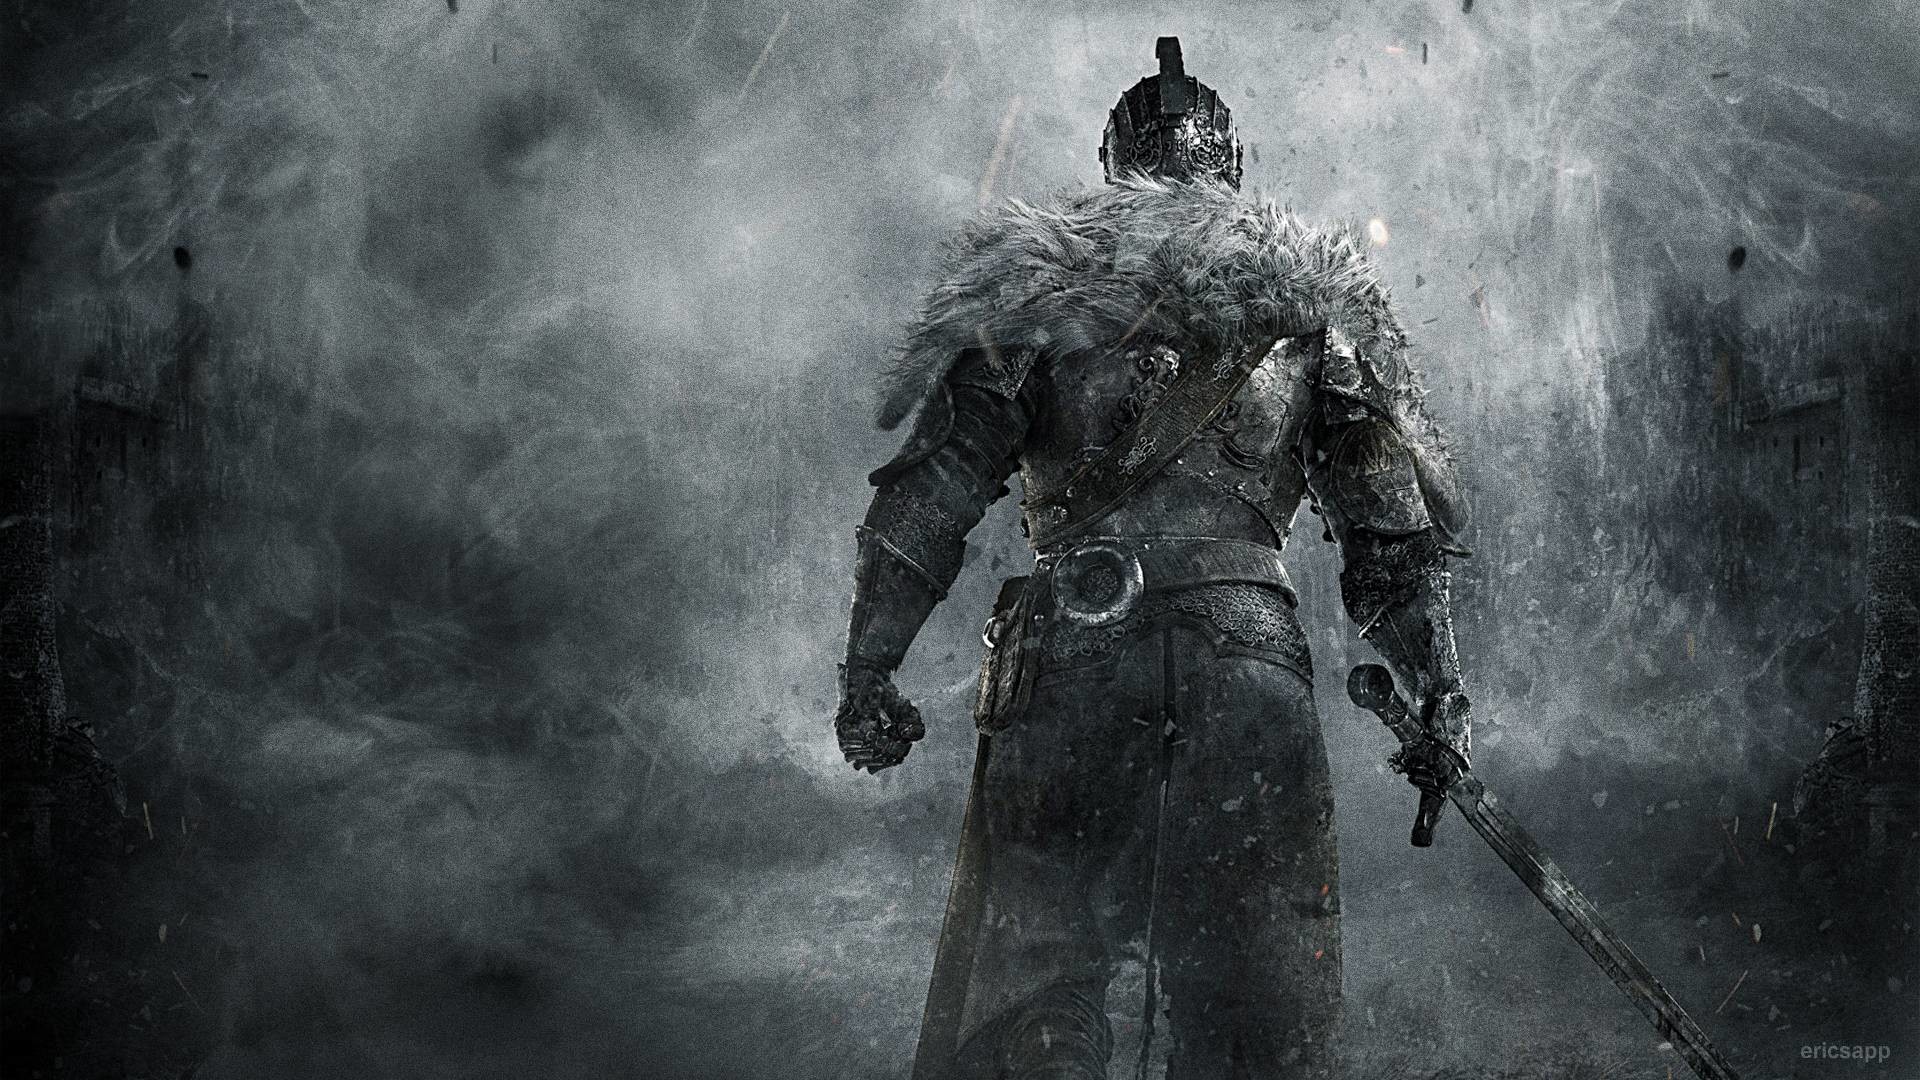 1920x1080 Dark Souls 2 Wallpaper Group with 68 items